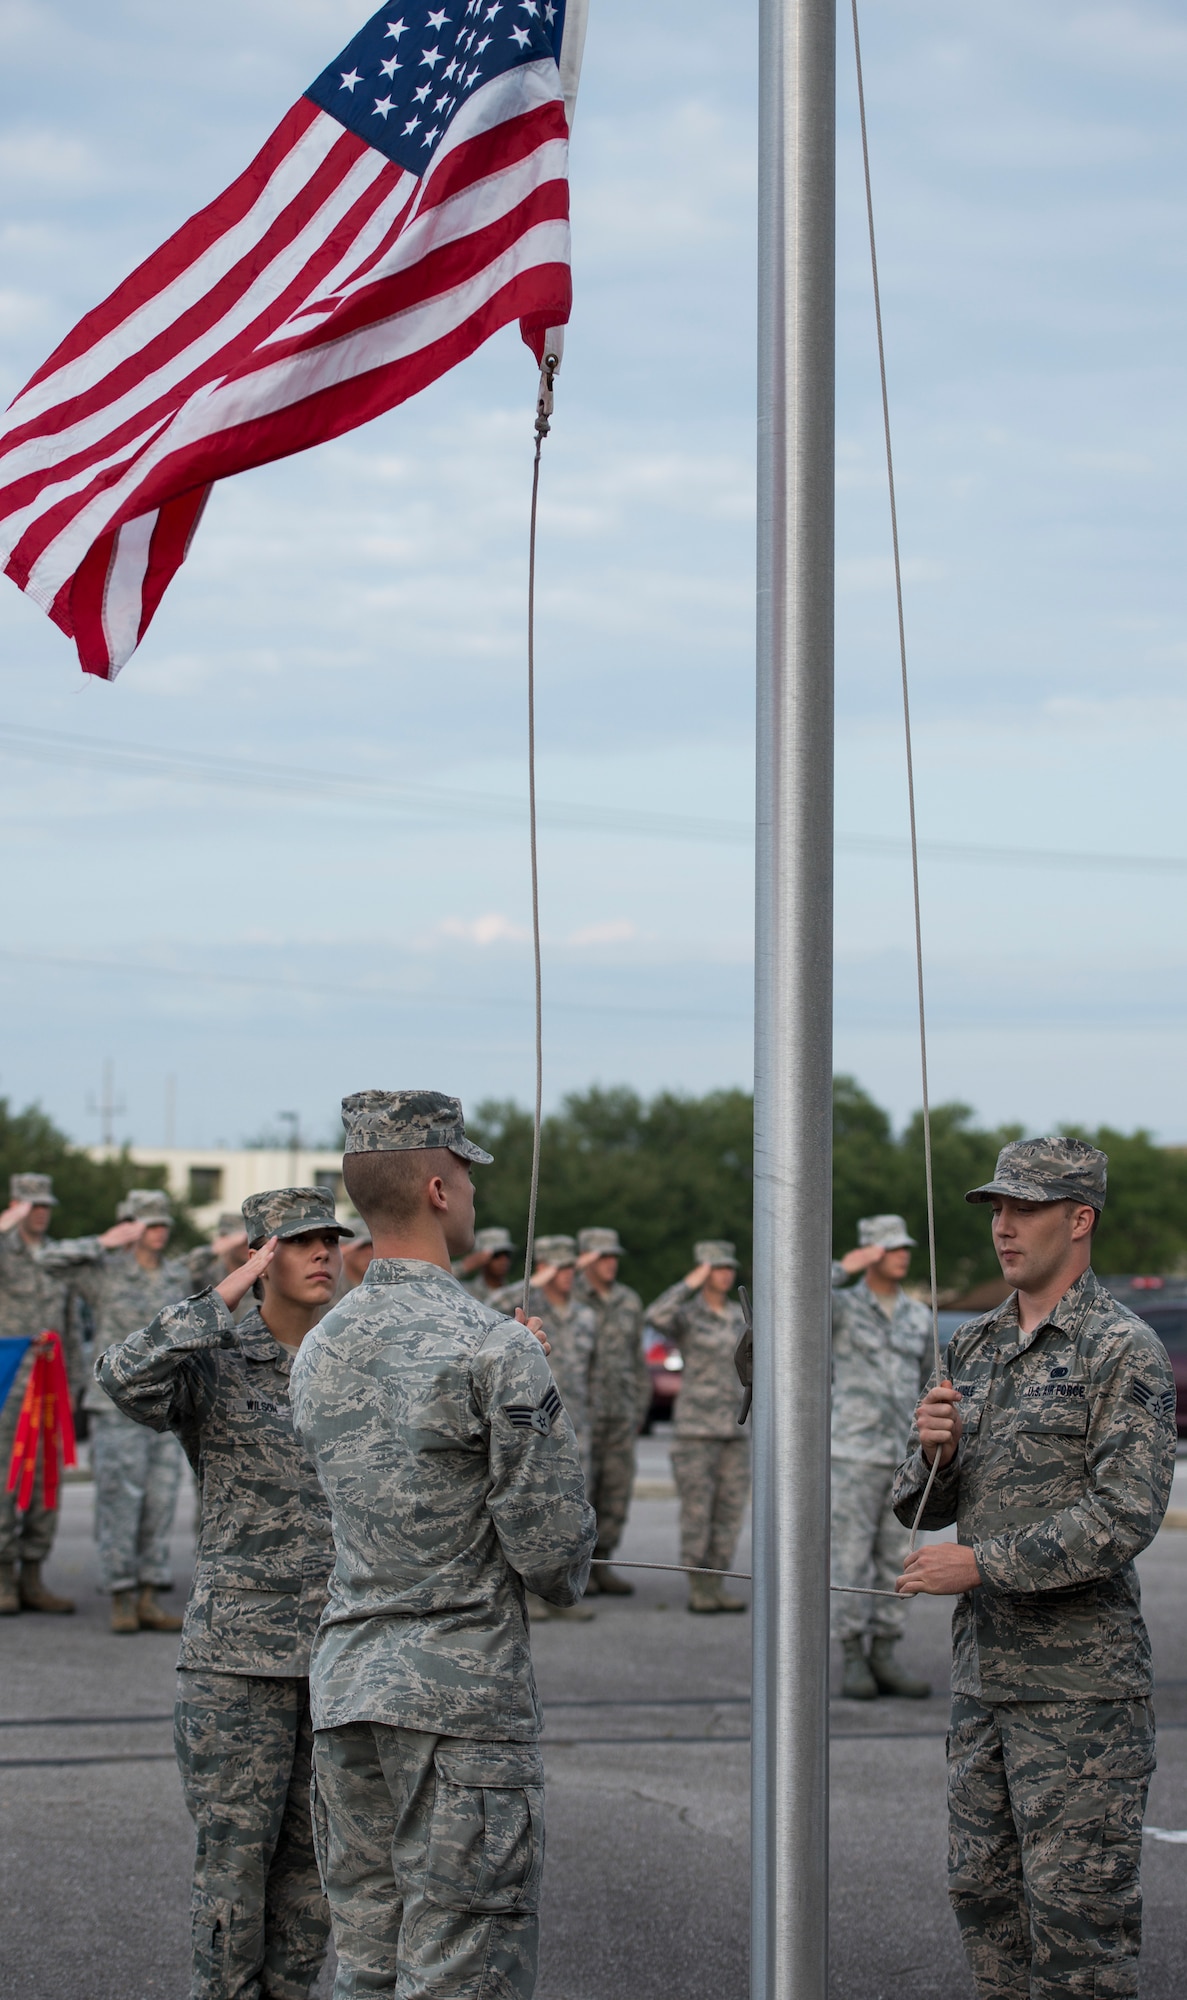 Airmen raise the American Flag during reveille at the Eglin Professional Development Center building Aug. 11.  Airman Leadership School students were in formation to salute during the ceremony.  The Airmen will graduate Aug. 26 as part of their month-long path to becoming a non-commissioned officer. Roughly every two to three weeks ALS starts up a new class, averaging seven classes a year. (U.S. Air Force photo/ Tech. Sgt. Jasmin Taylor)